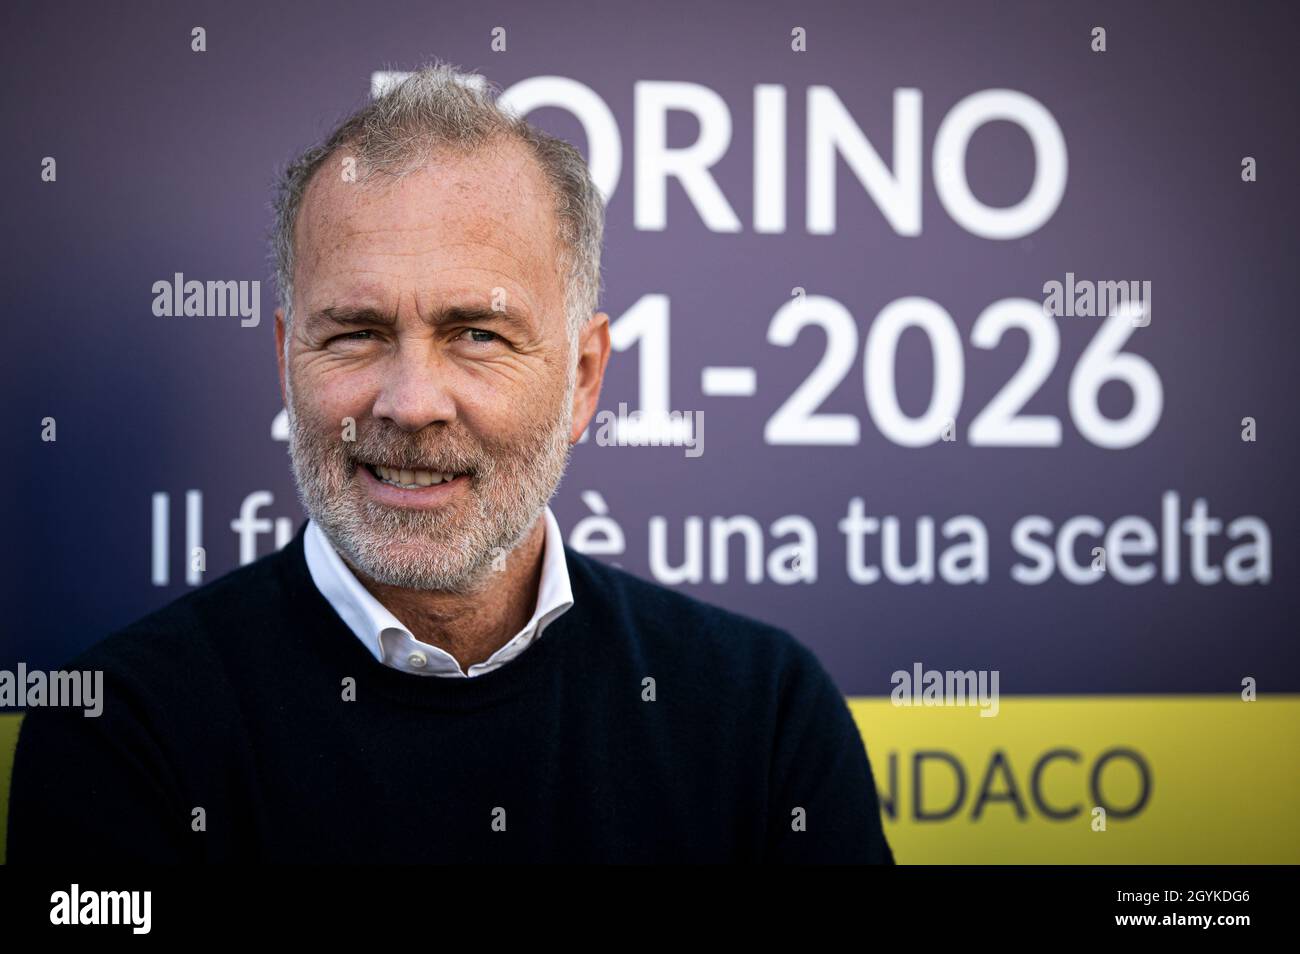 Turin, Italy. 08th Oct, 2021. Paolo Damilano, Mayor of Turin candidate for centre-right coalition, smiles during an electoral event part of institutional visit to Turin of Minister for the South and territorial cohesion Mara Carfagna. Credit: Nicolò Campo/Alamy Live News Stock Photo